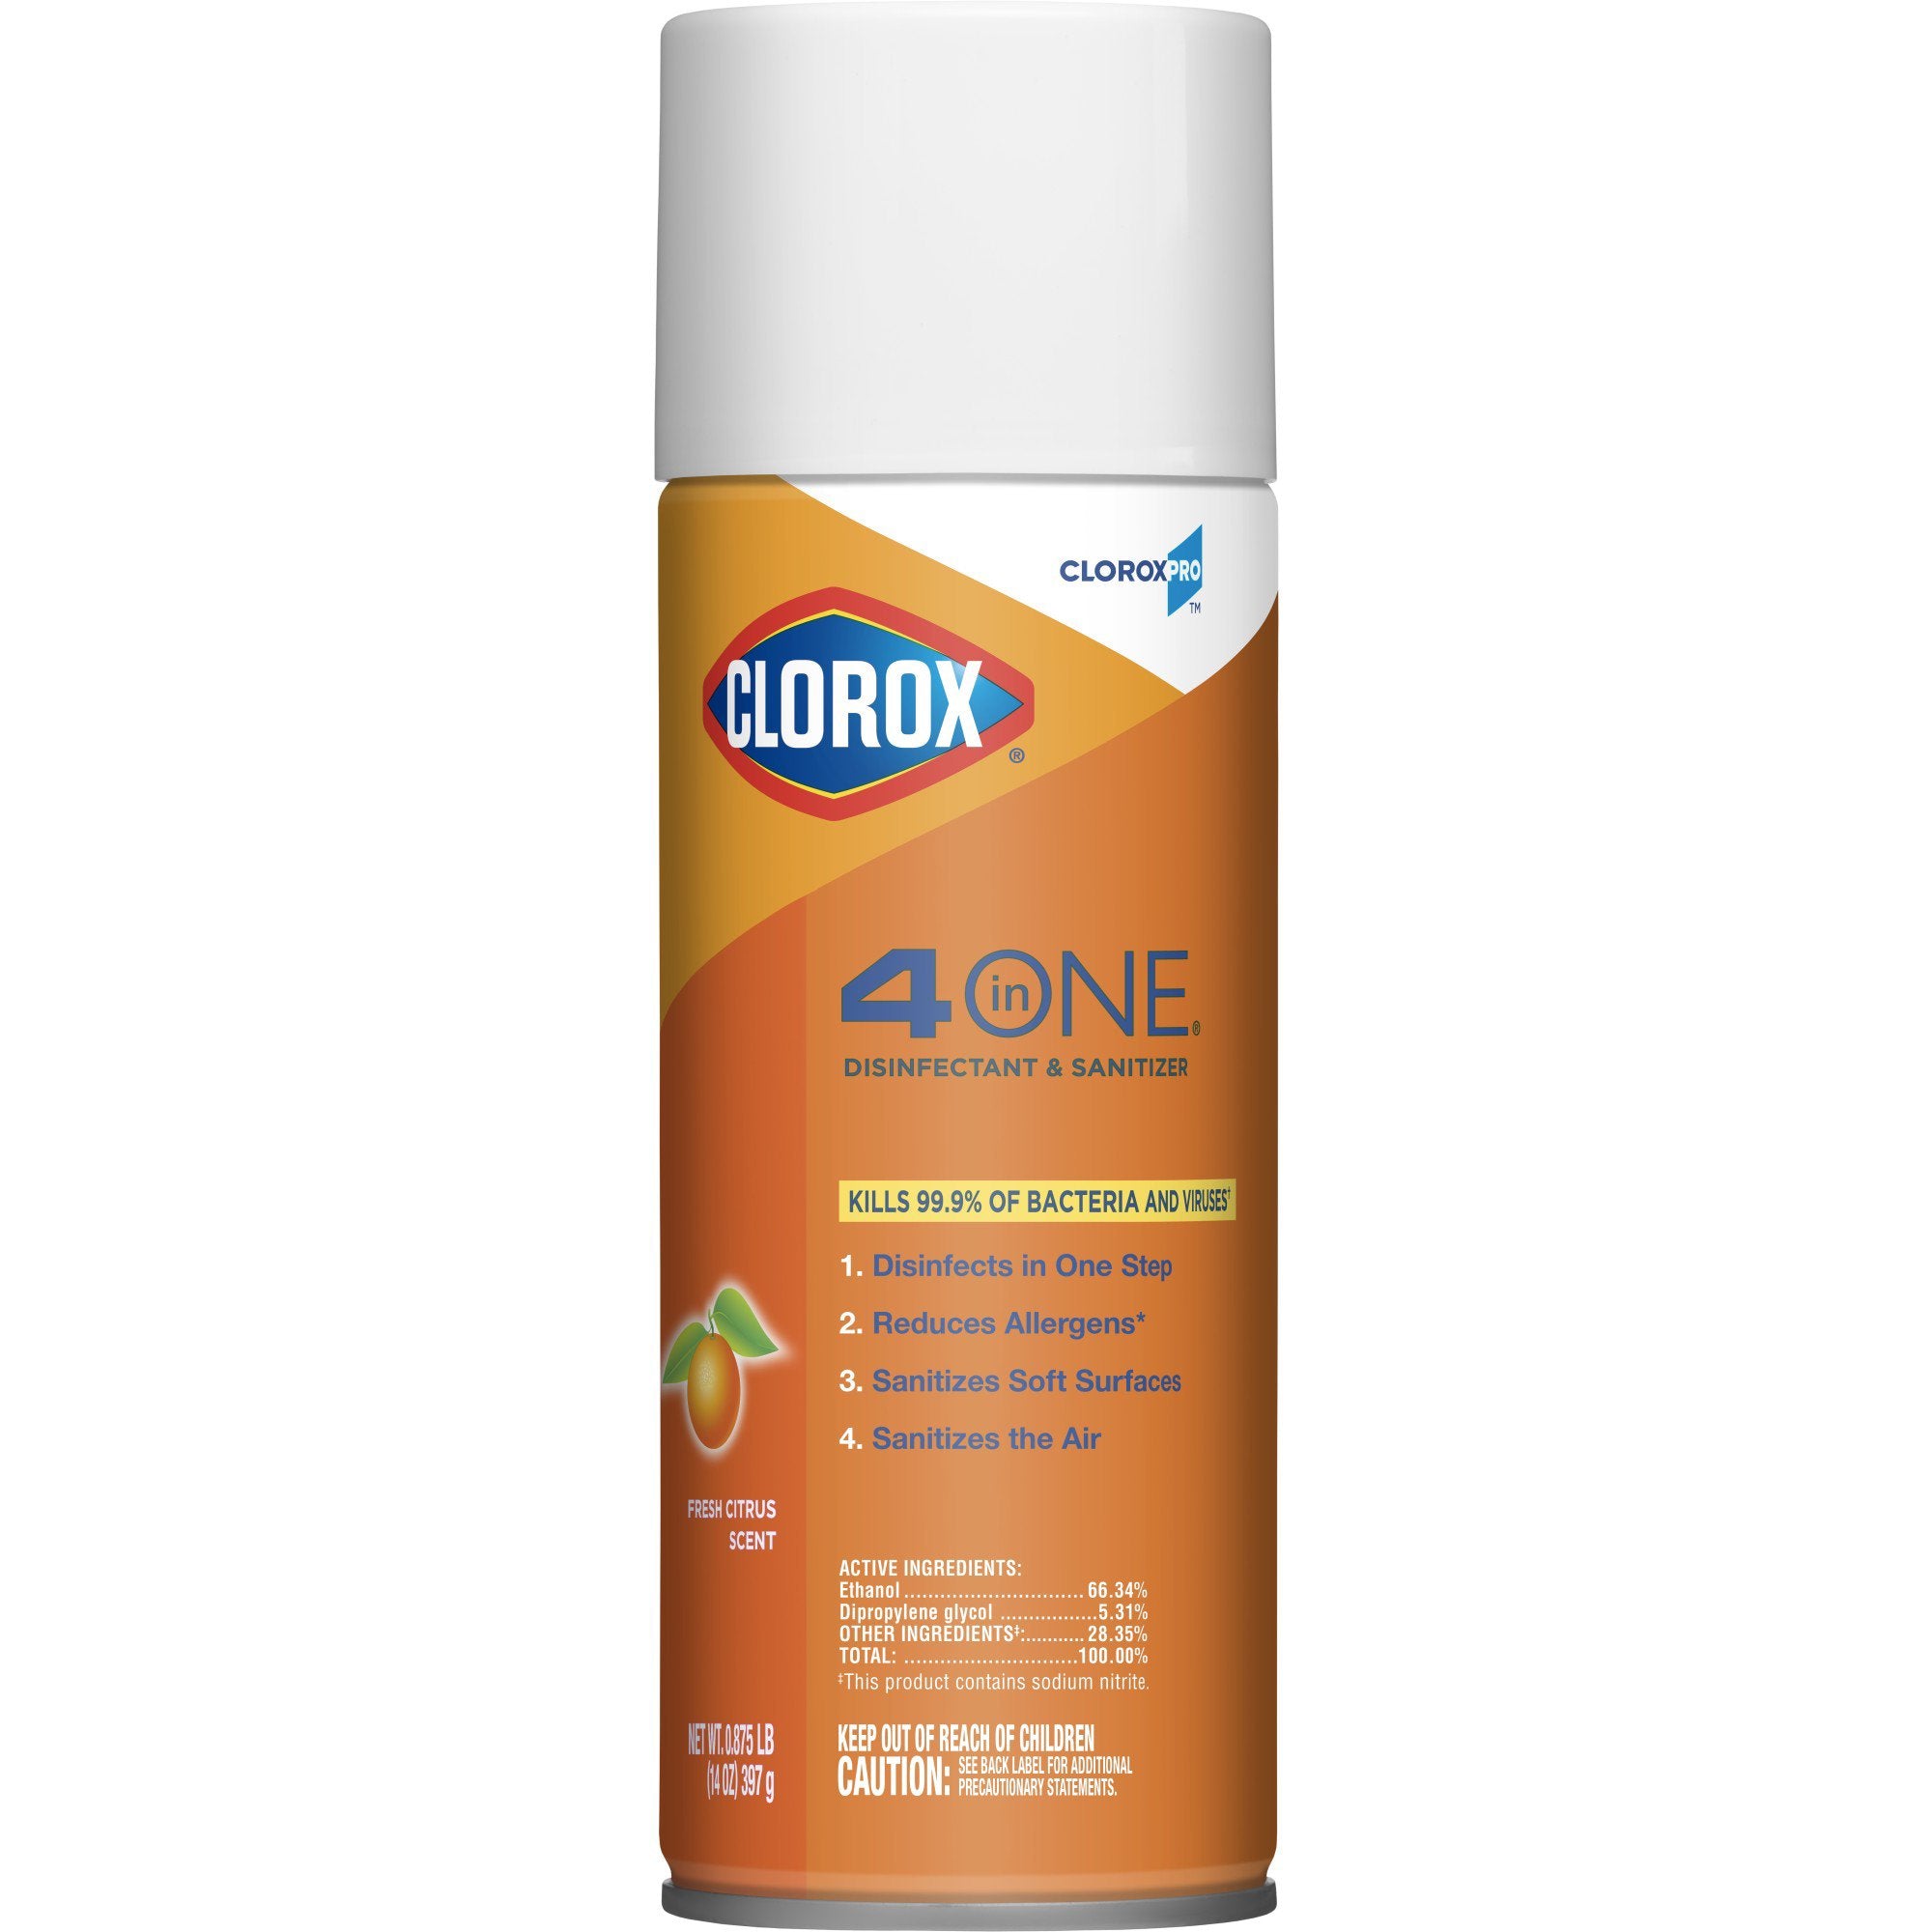 CloroxPro™ Clorox® 4 in One Surface Disinfectant / Sanitizer Alcohol Based Aerosol Spray Liquid 14 oz. Can Citrus Scent NonSterile